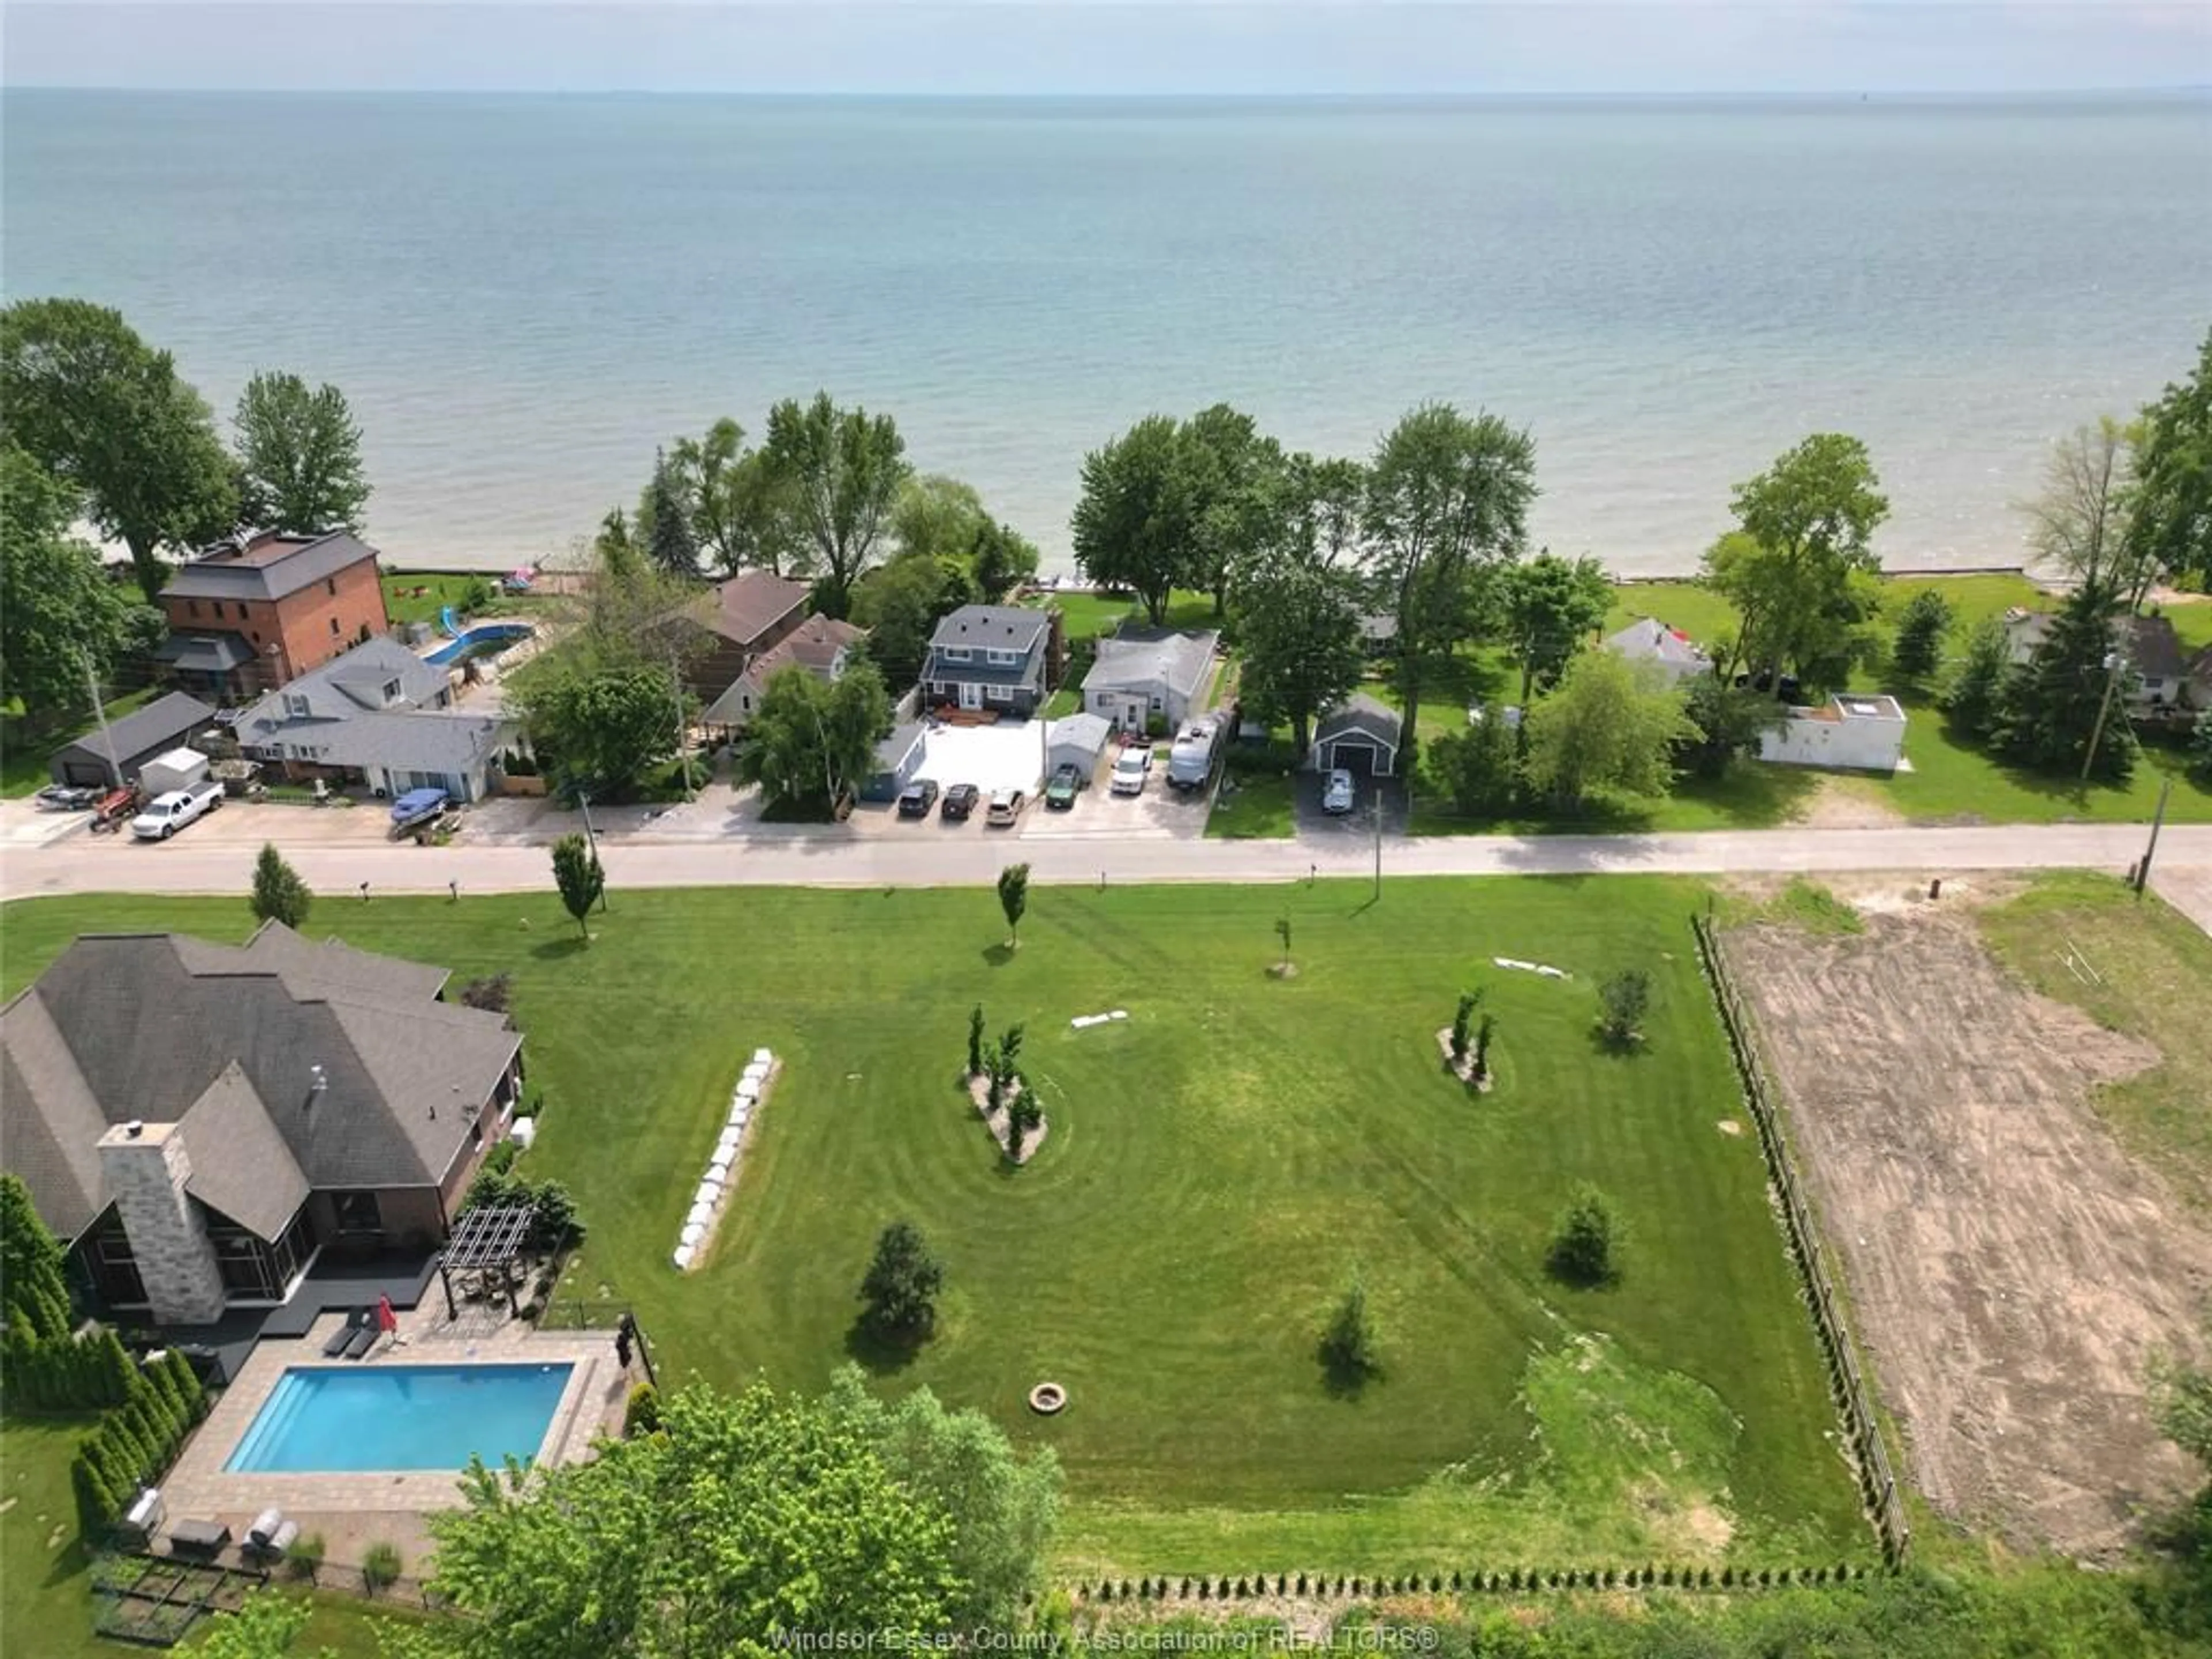 Lakeview for LOT 67 & 68 WILLOW BEACH, Amherstburg Ontario N9V 2Y8